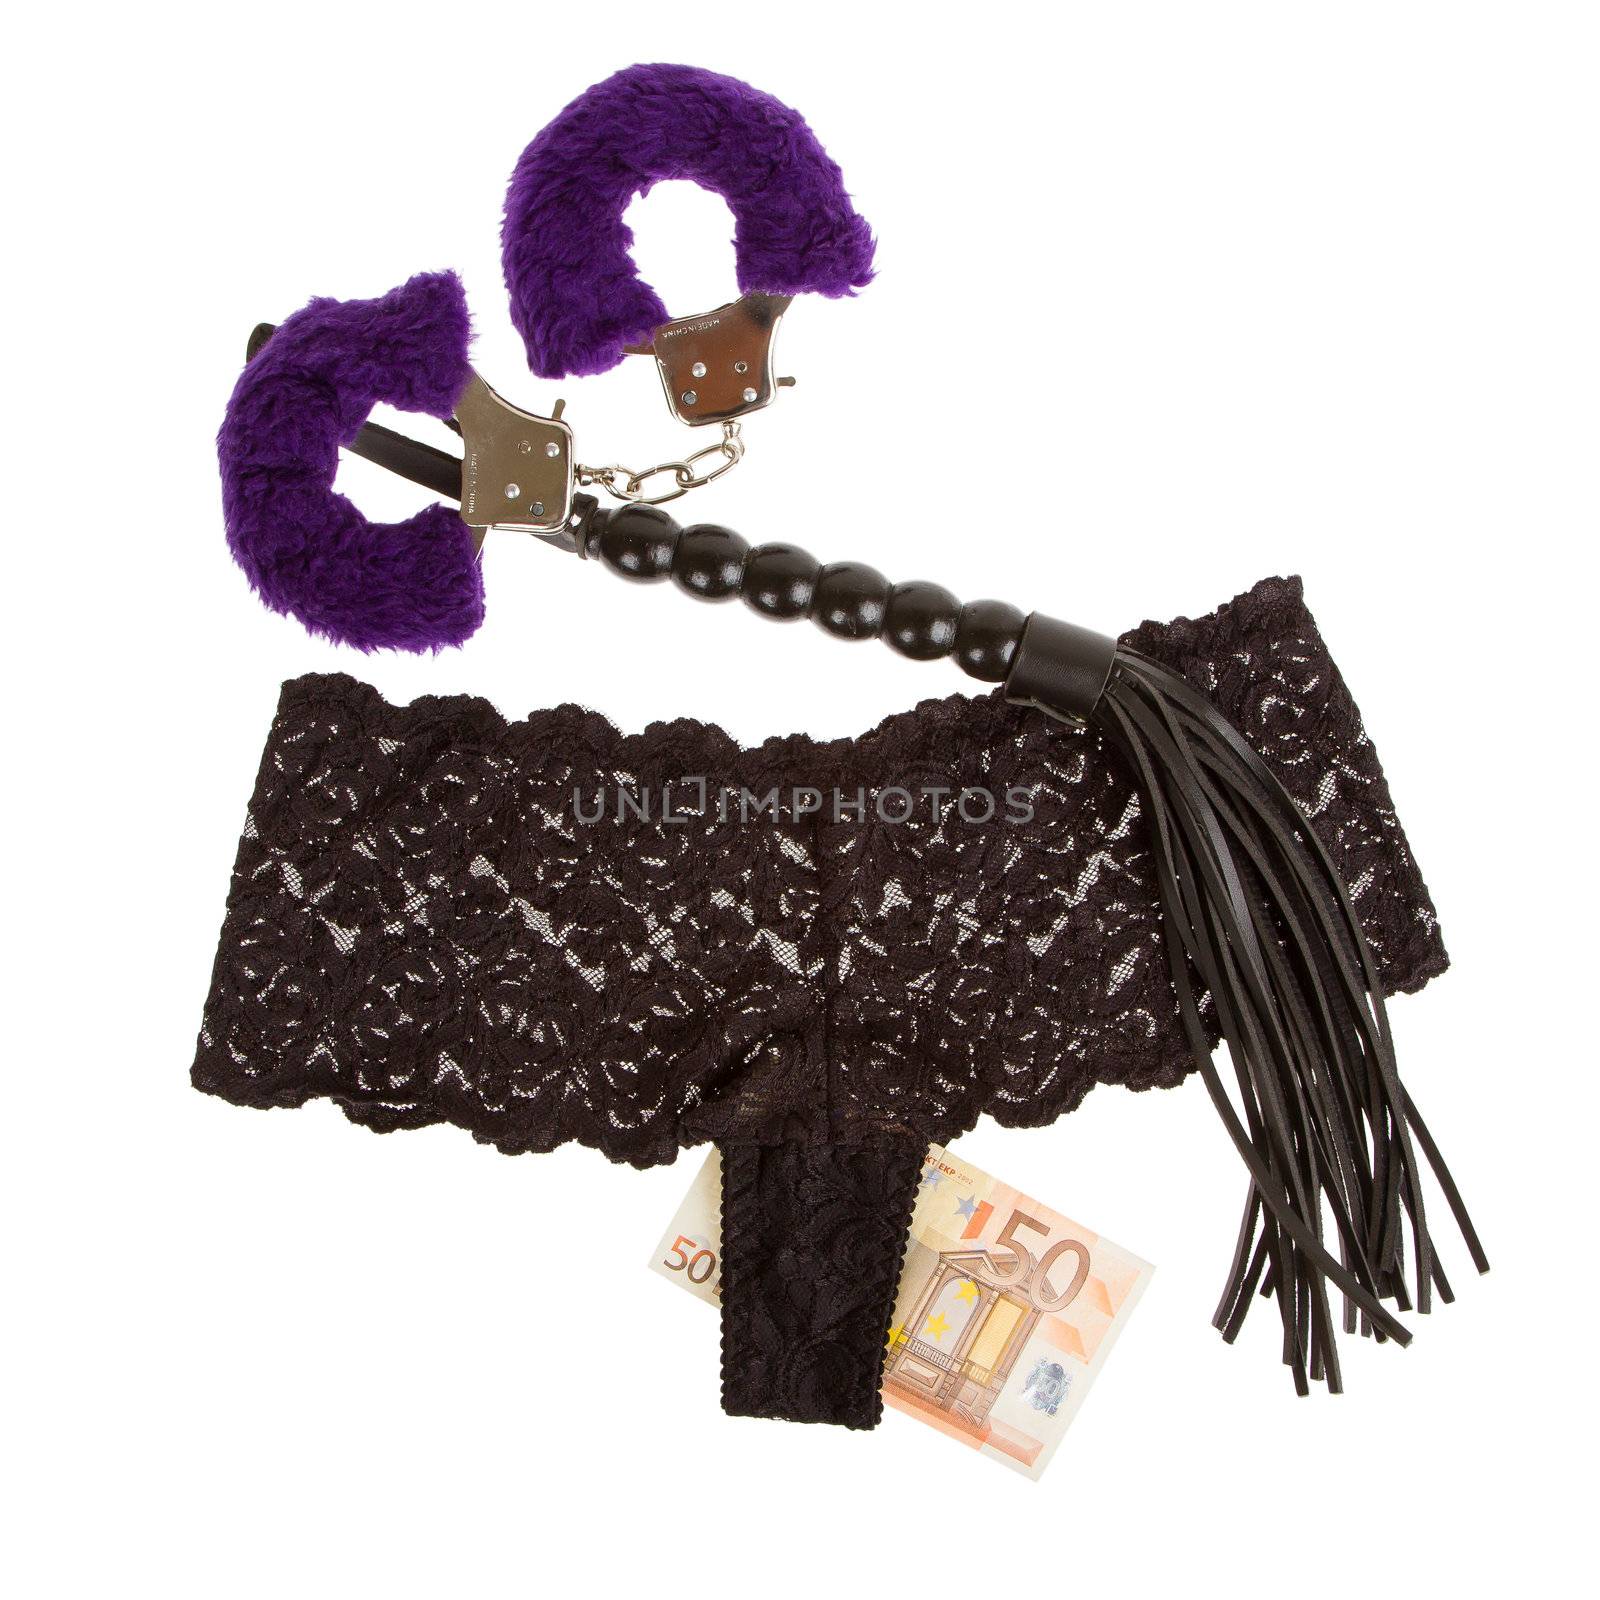 Fluffy purple handcuffs, a whip, money and panties, prostitution by michaklootwijk